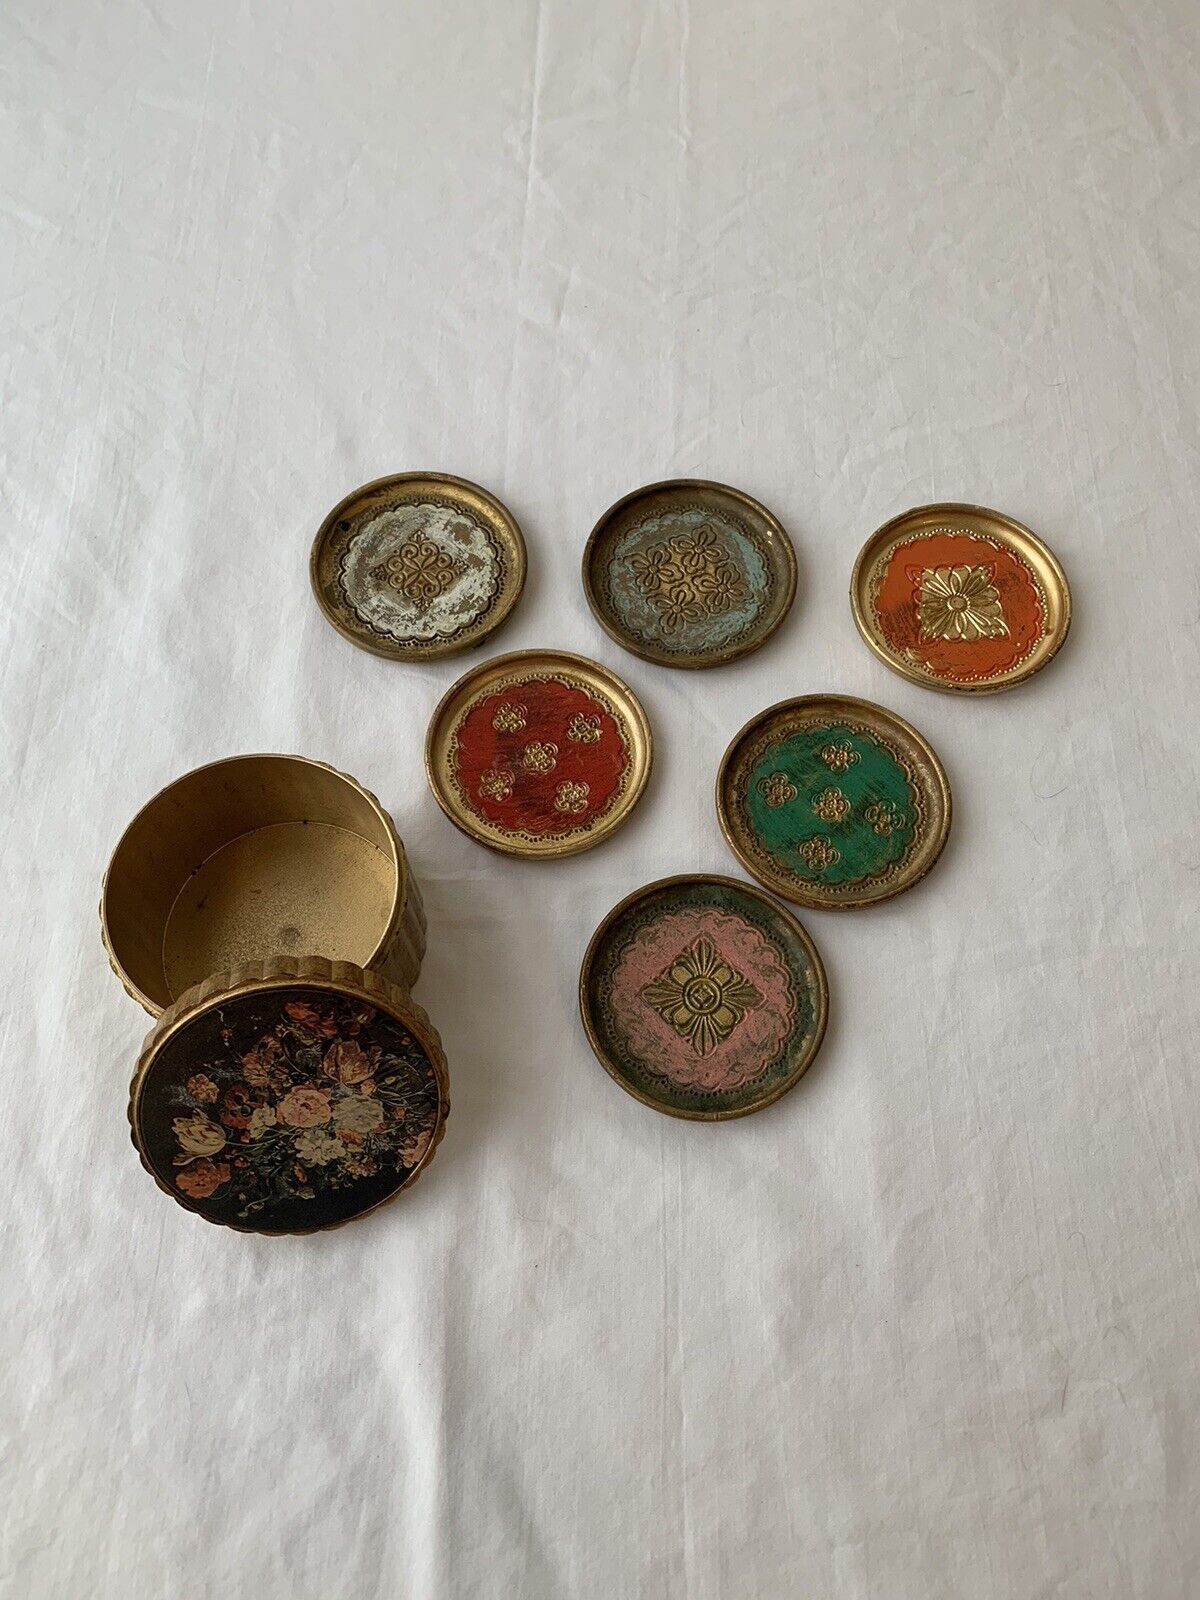 Vintage Florentine Coasters Made in Italy Set of Six in Box Gold Gilt Floral 